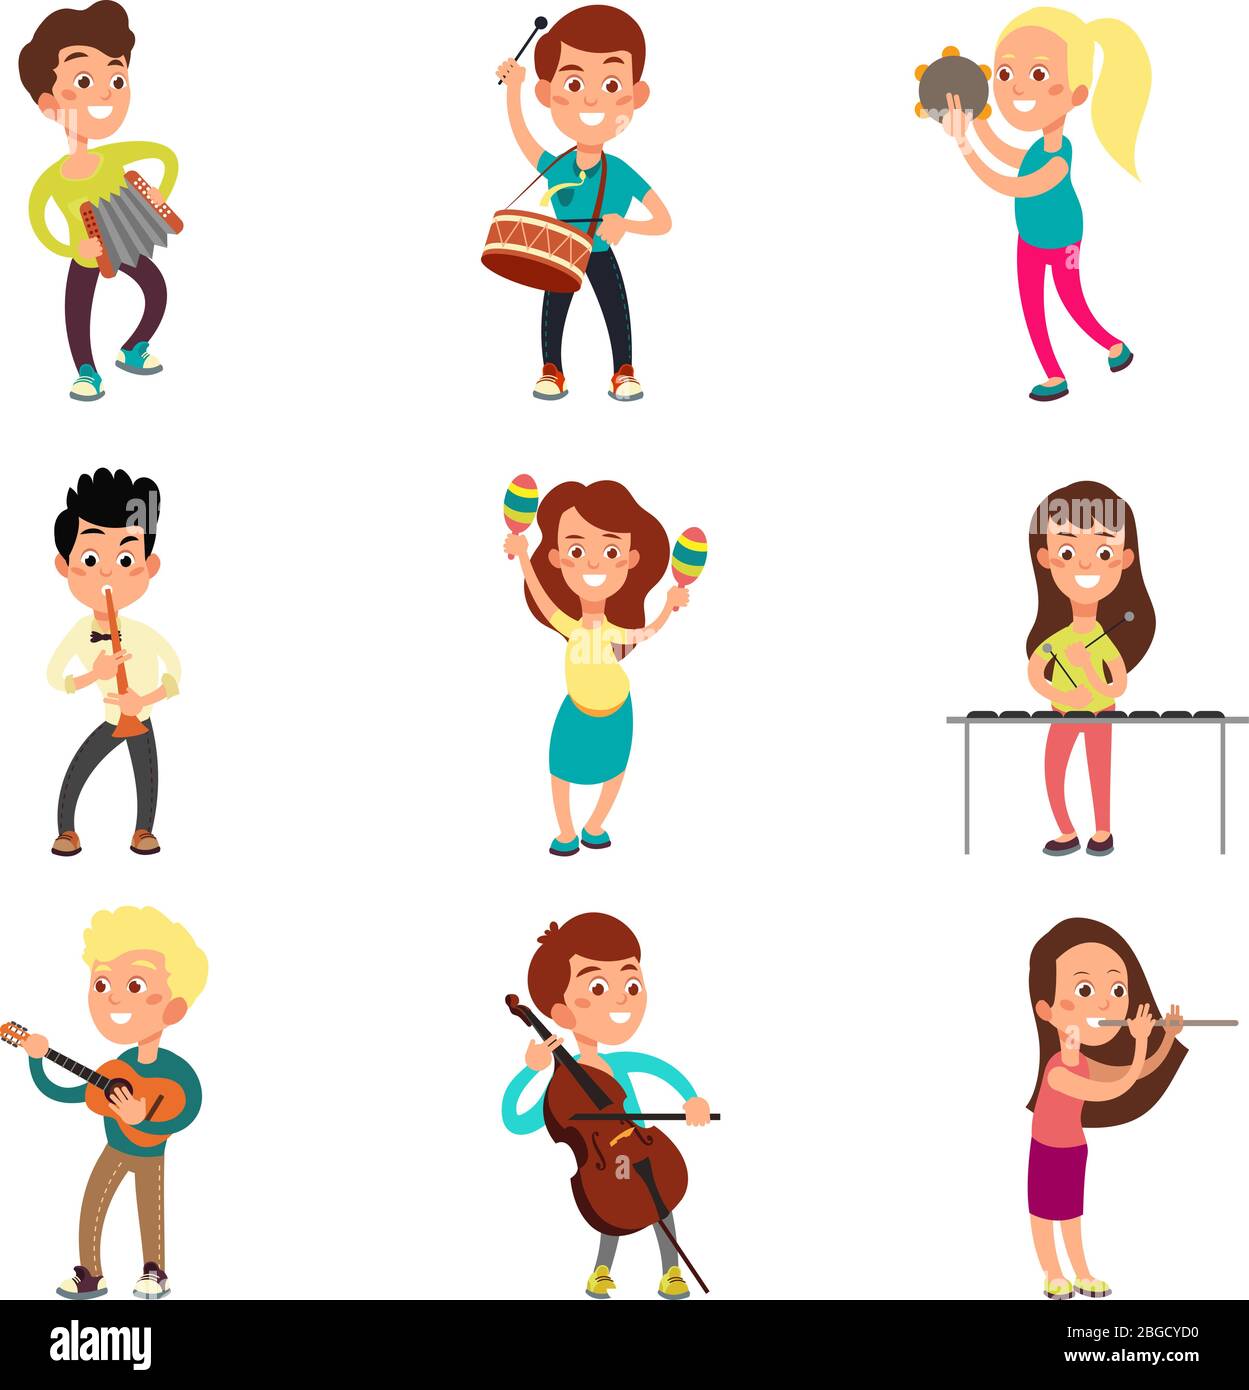 https://c8.alamy.com/comp/2BGCYD0/happy-children-musicians-with-musical-instruments-talented-kids-playing-music-singing-and-dancing-cartoon-vector-characters-set-musical-kids-talent-young-performance-playing-illustration-2BGCYD0.jpg